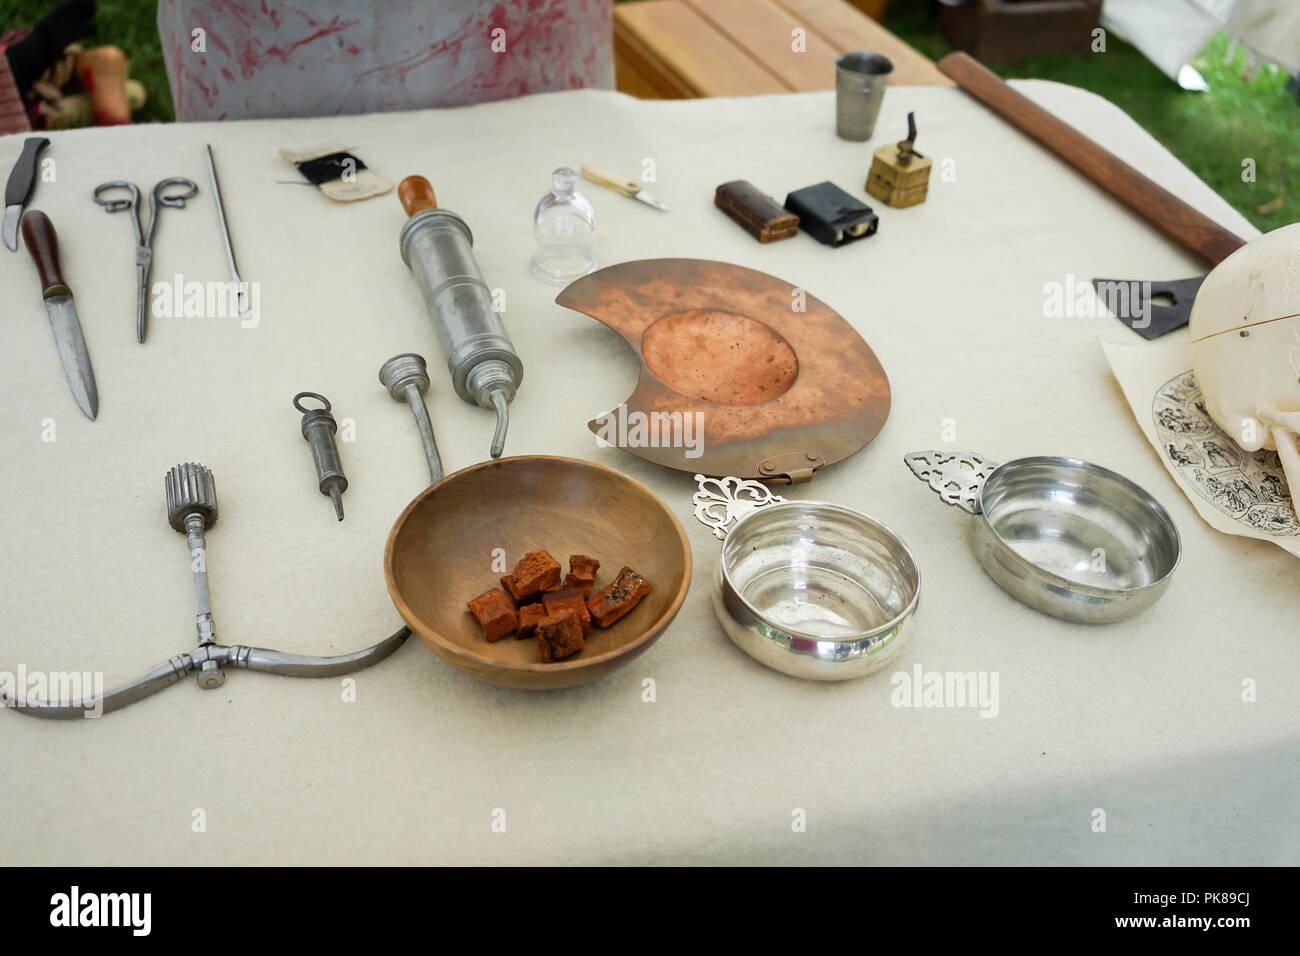 19th century medical instruments on display at 1812 Surgeon demonstration Stock Photo